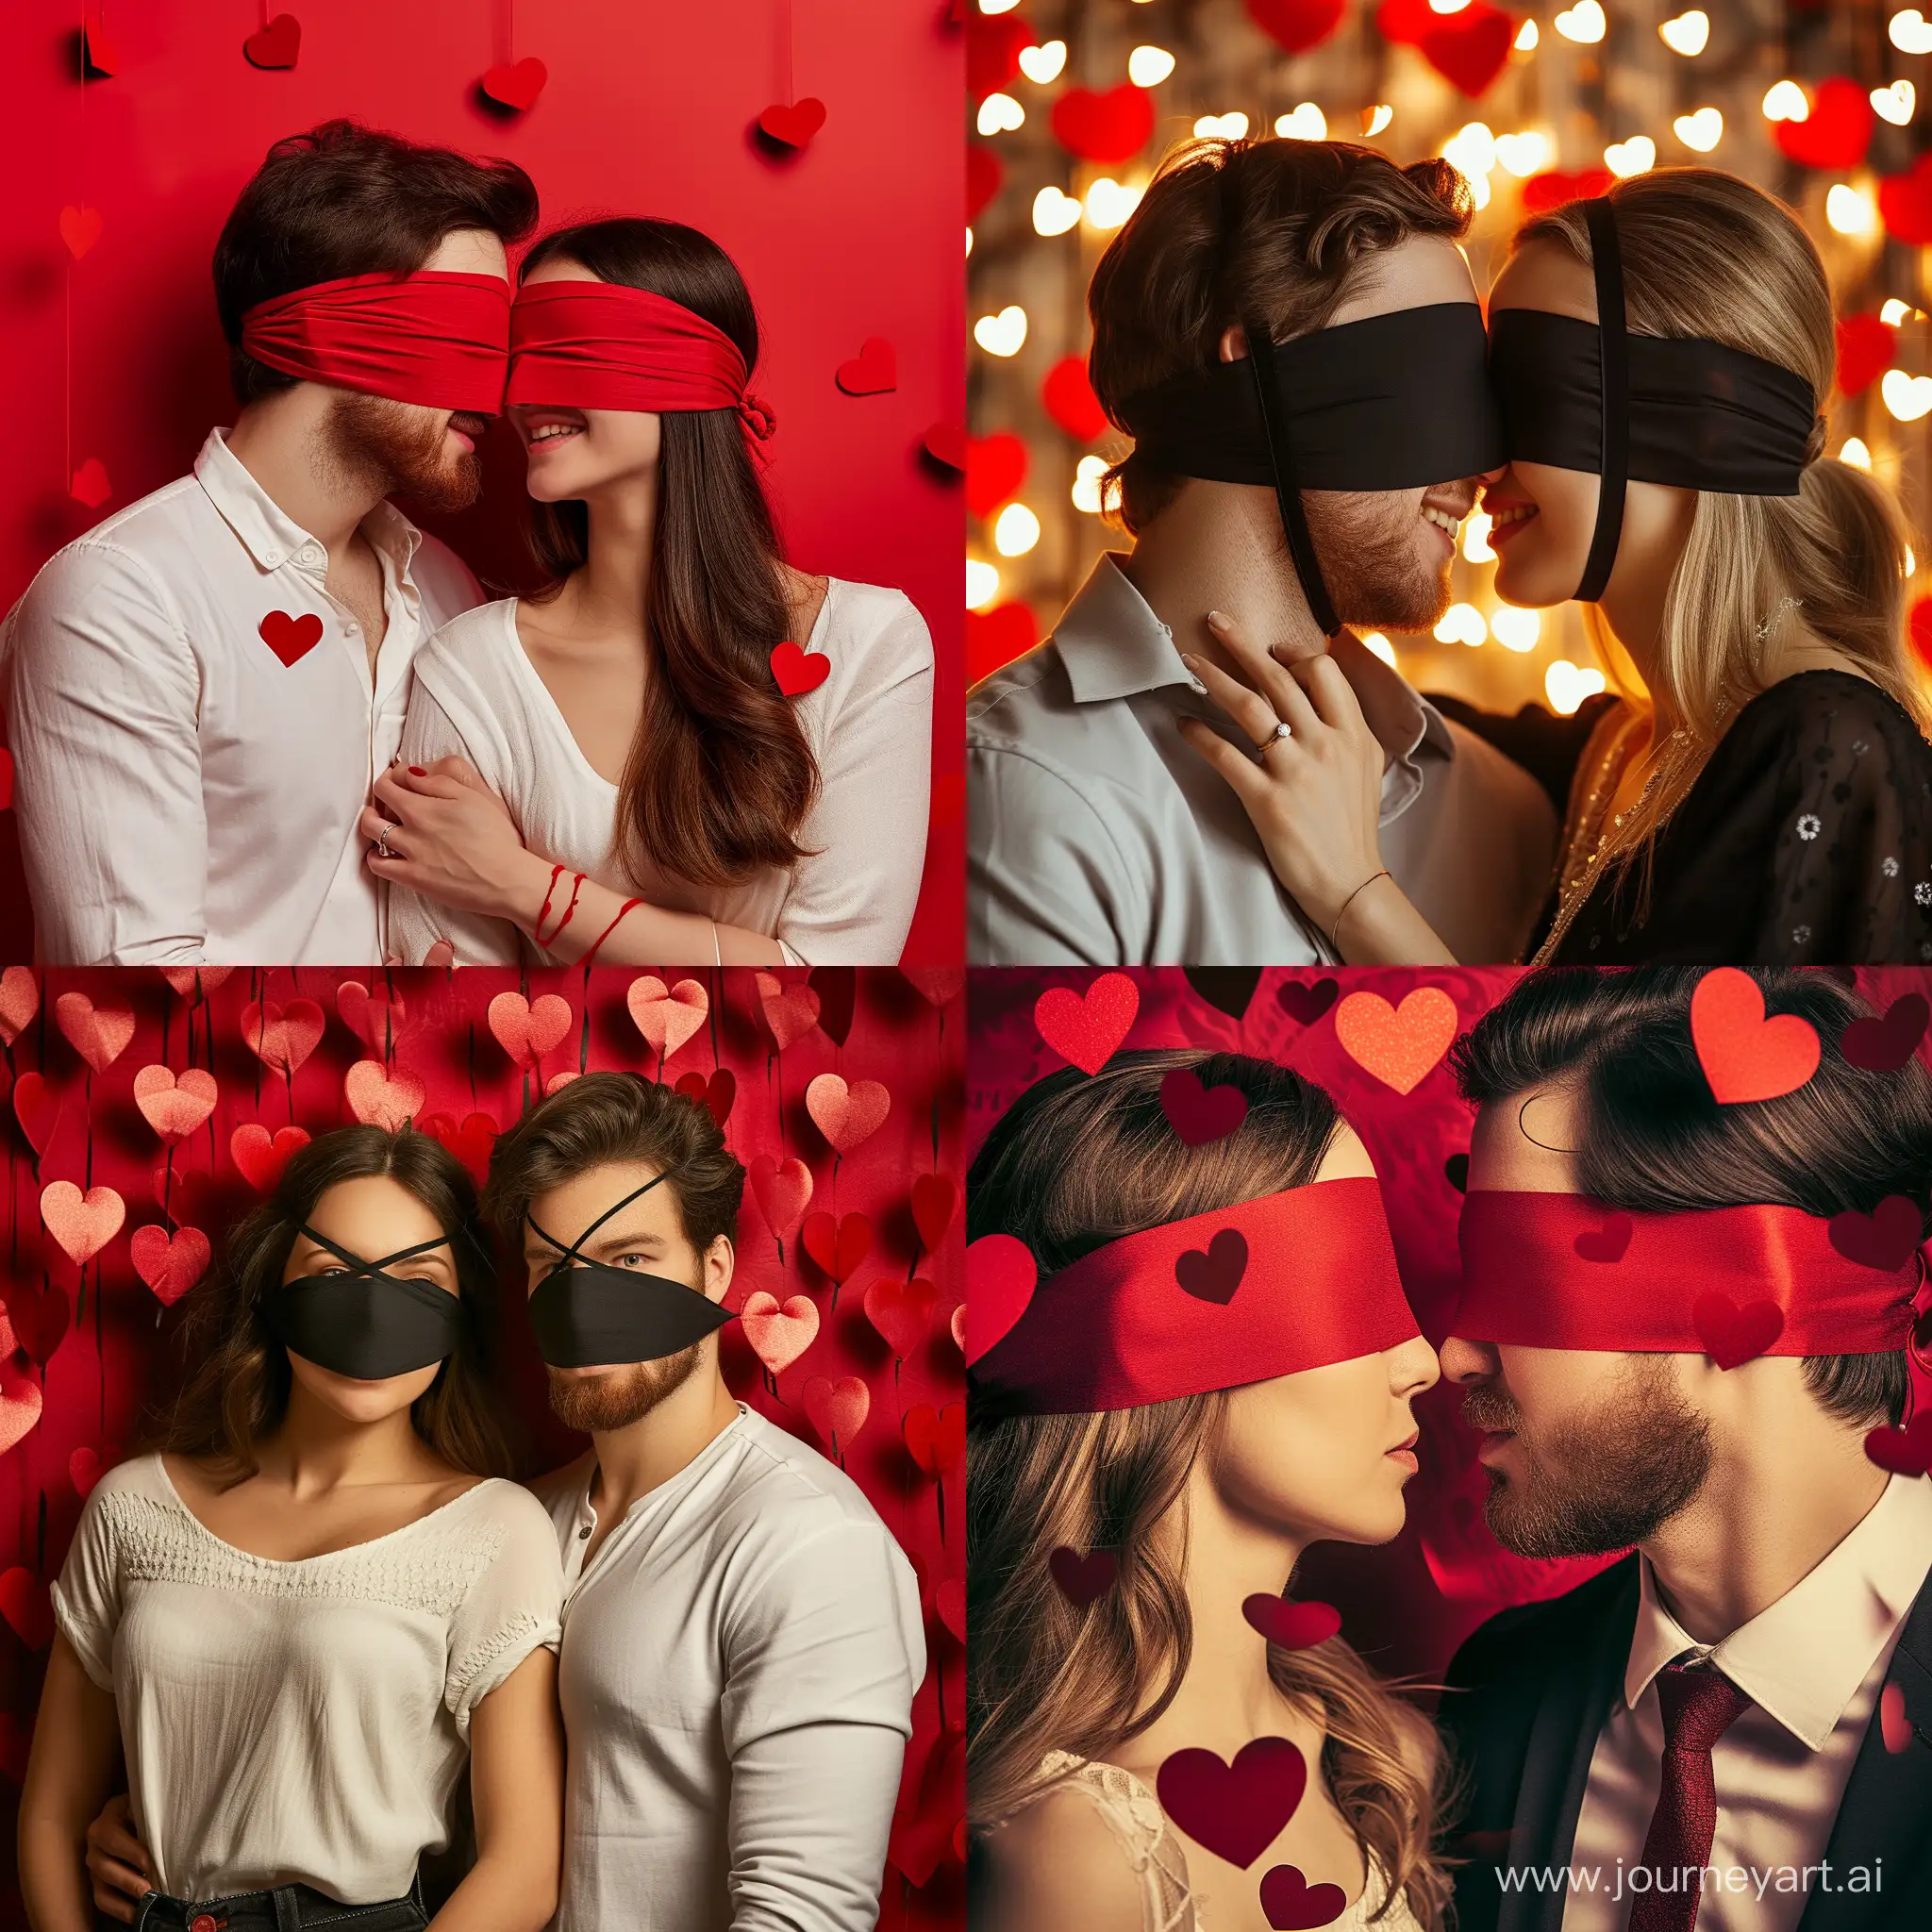 Romantic-Blindfolded-Couple-Embracing-in-Valentines-Day-Style